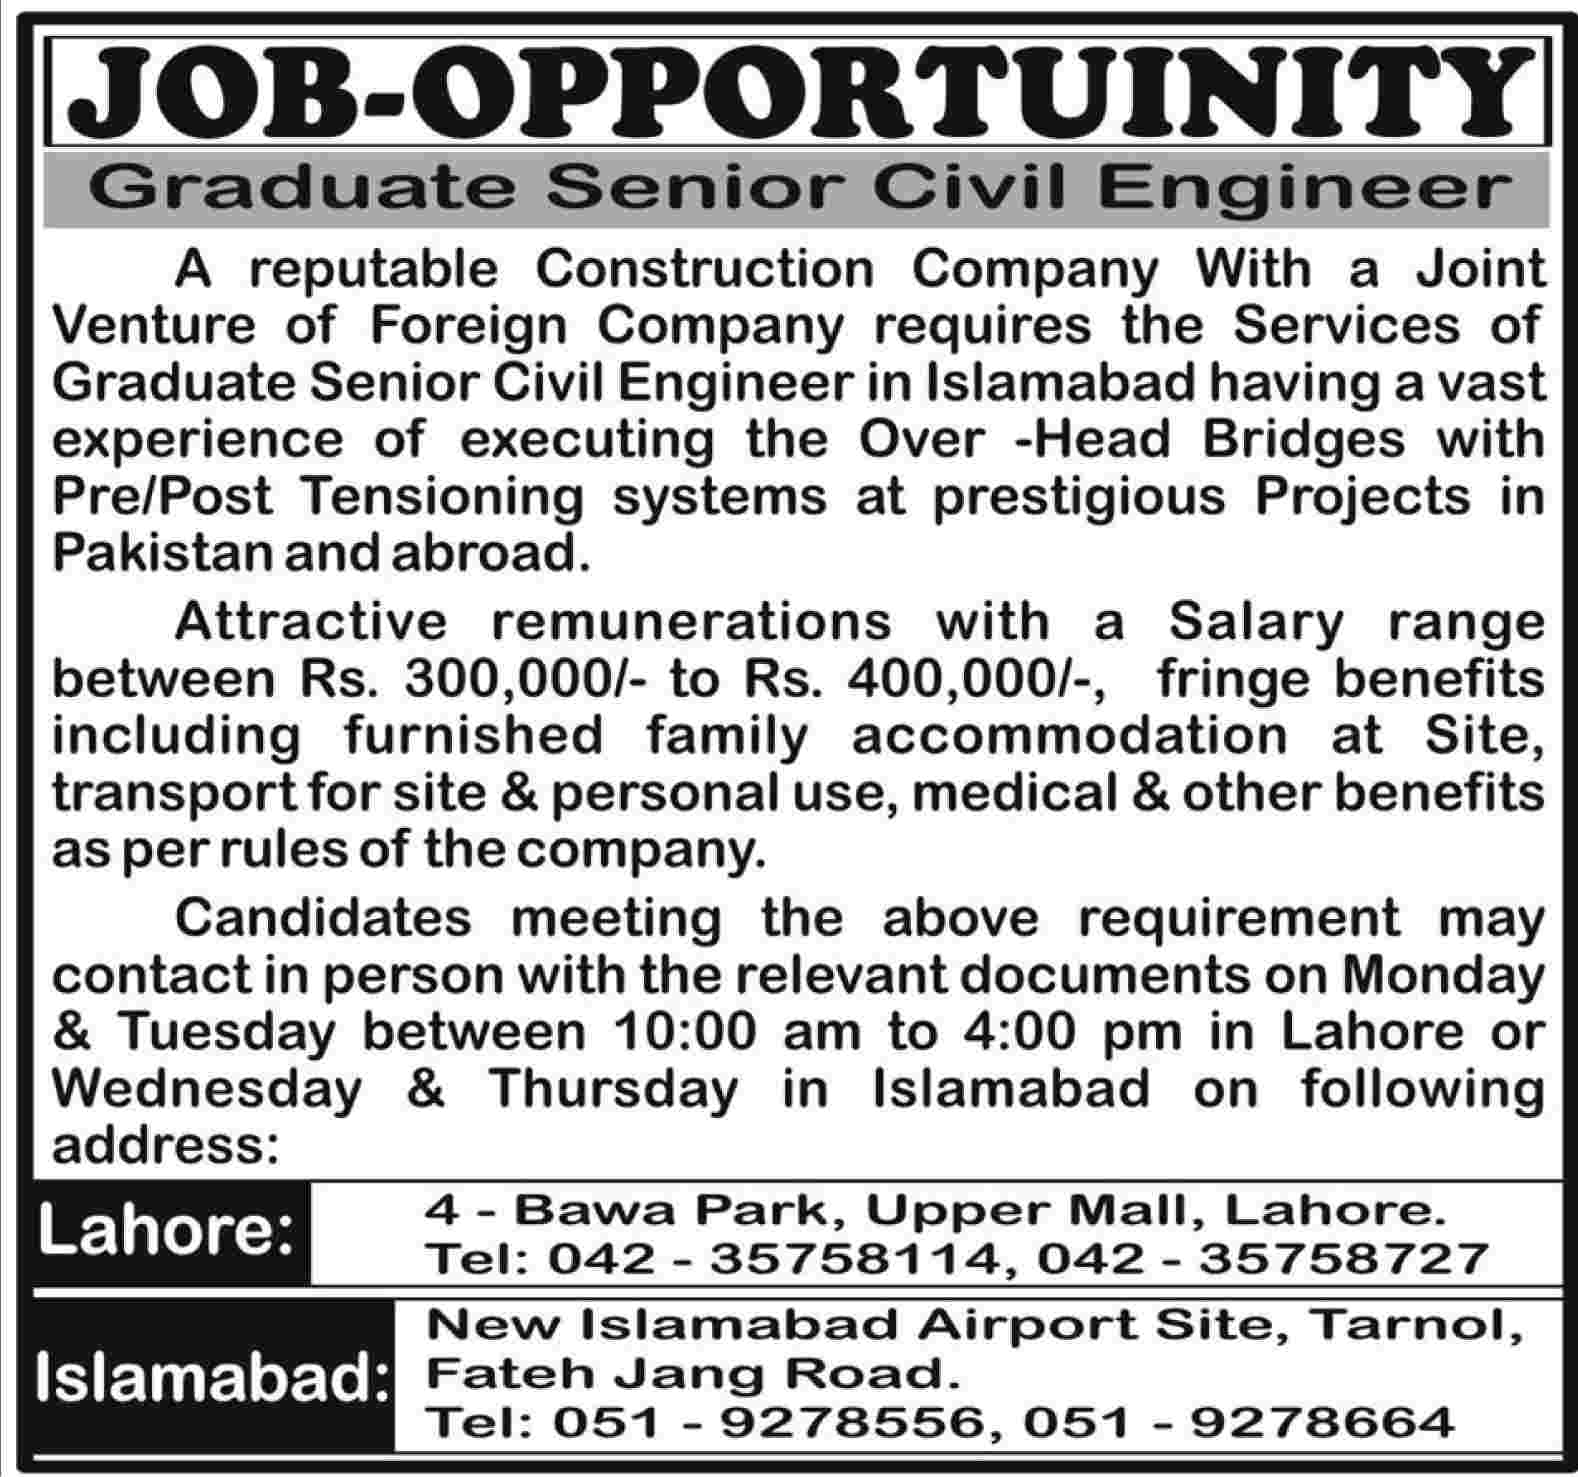 Civil Engineer Required at a Reputable Construction Company